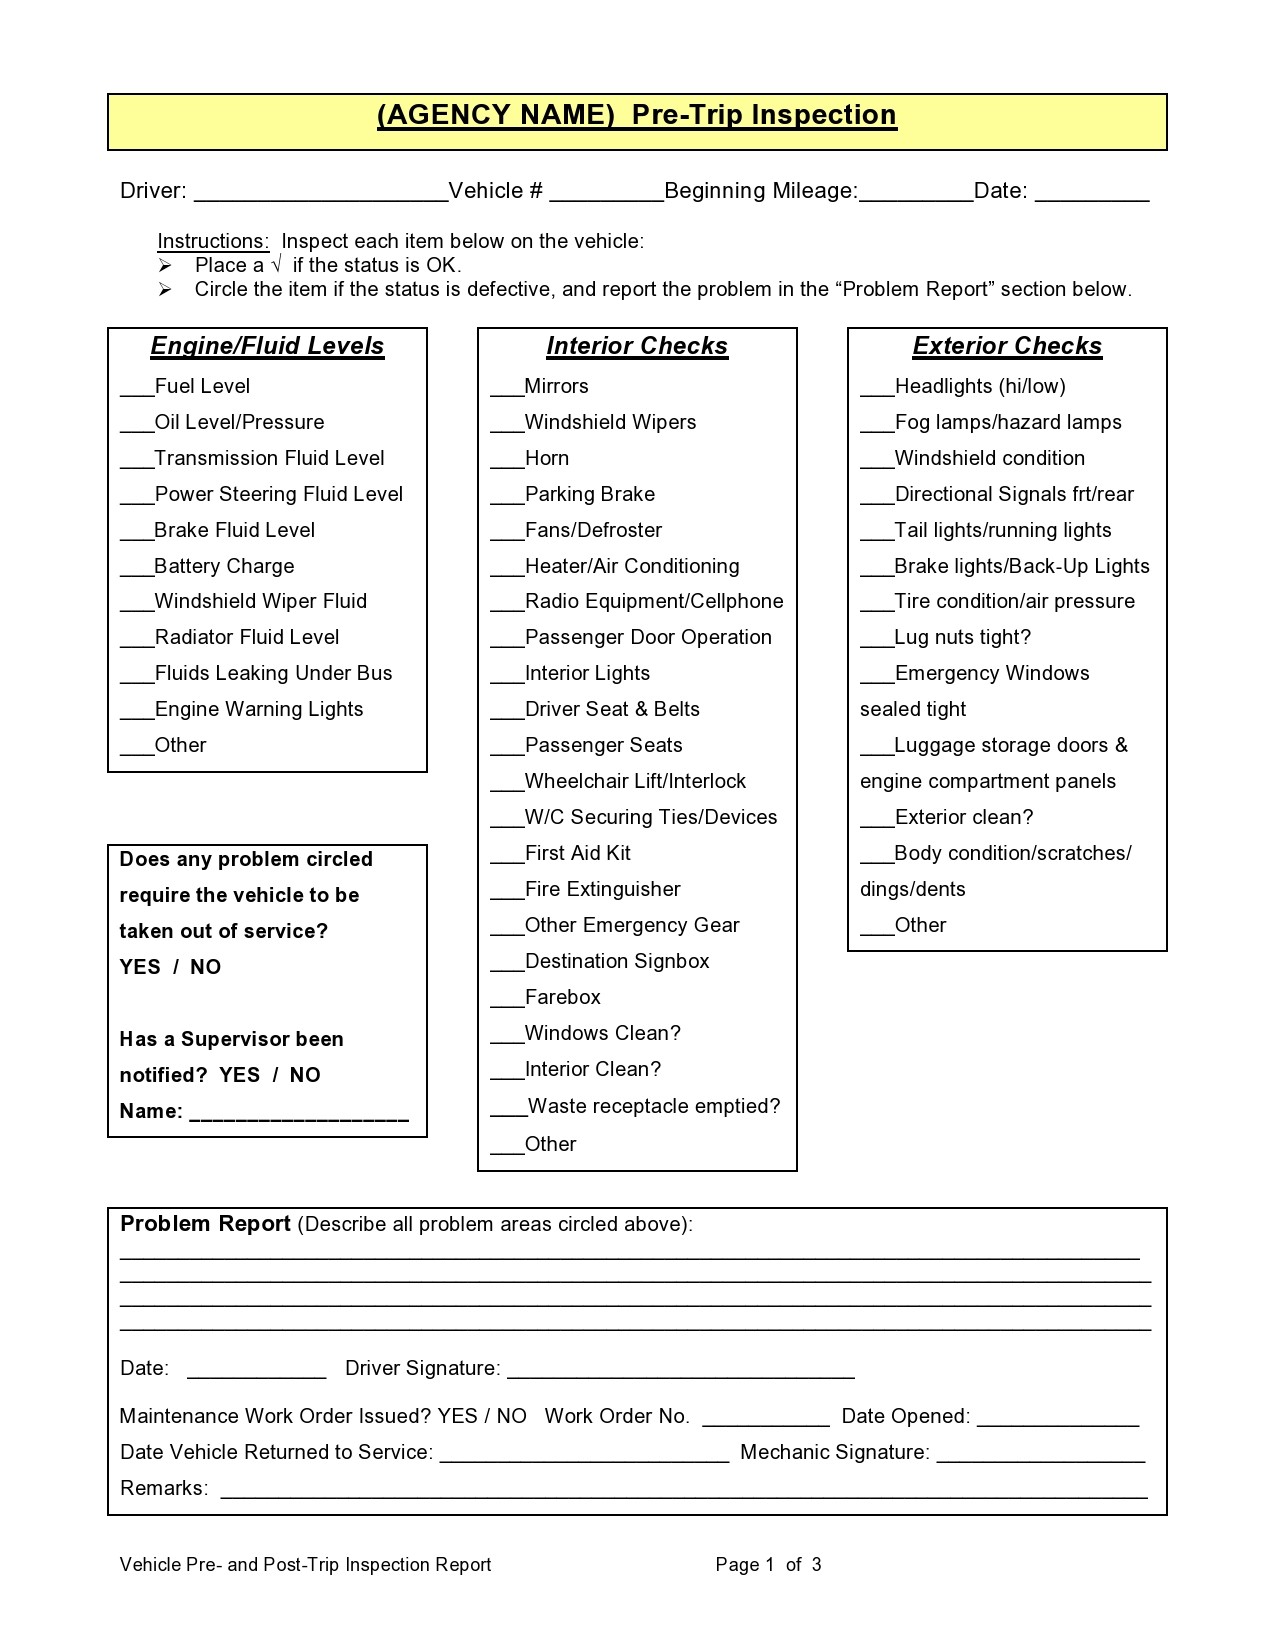 Free vehicle inspection form 20